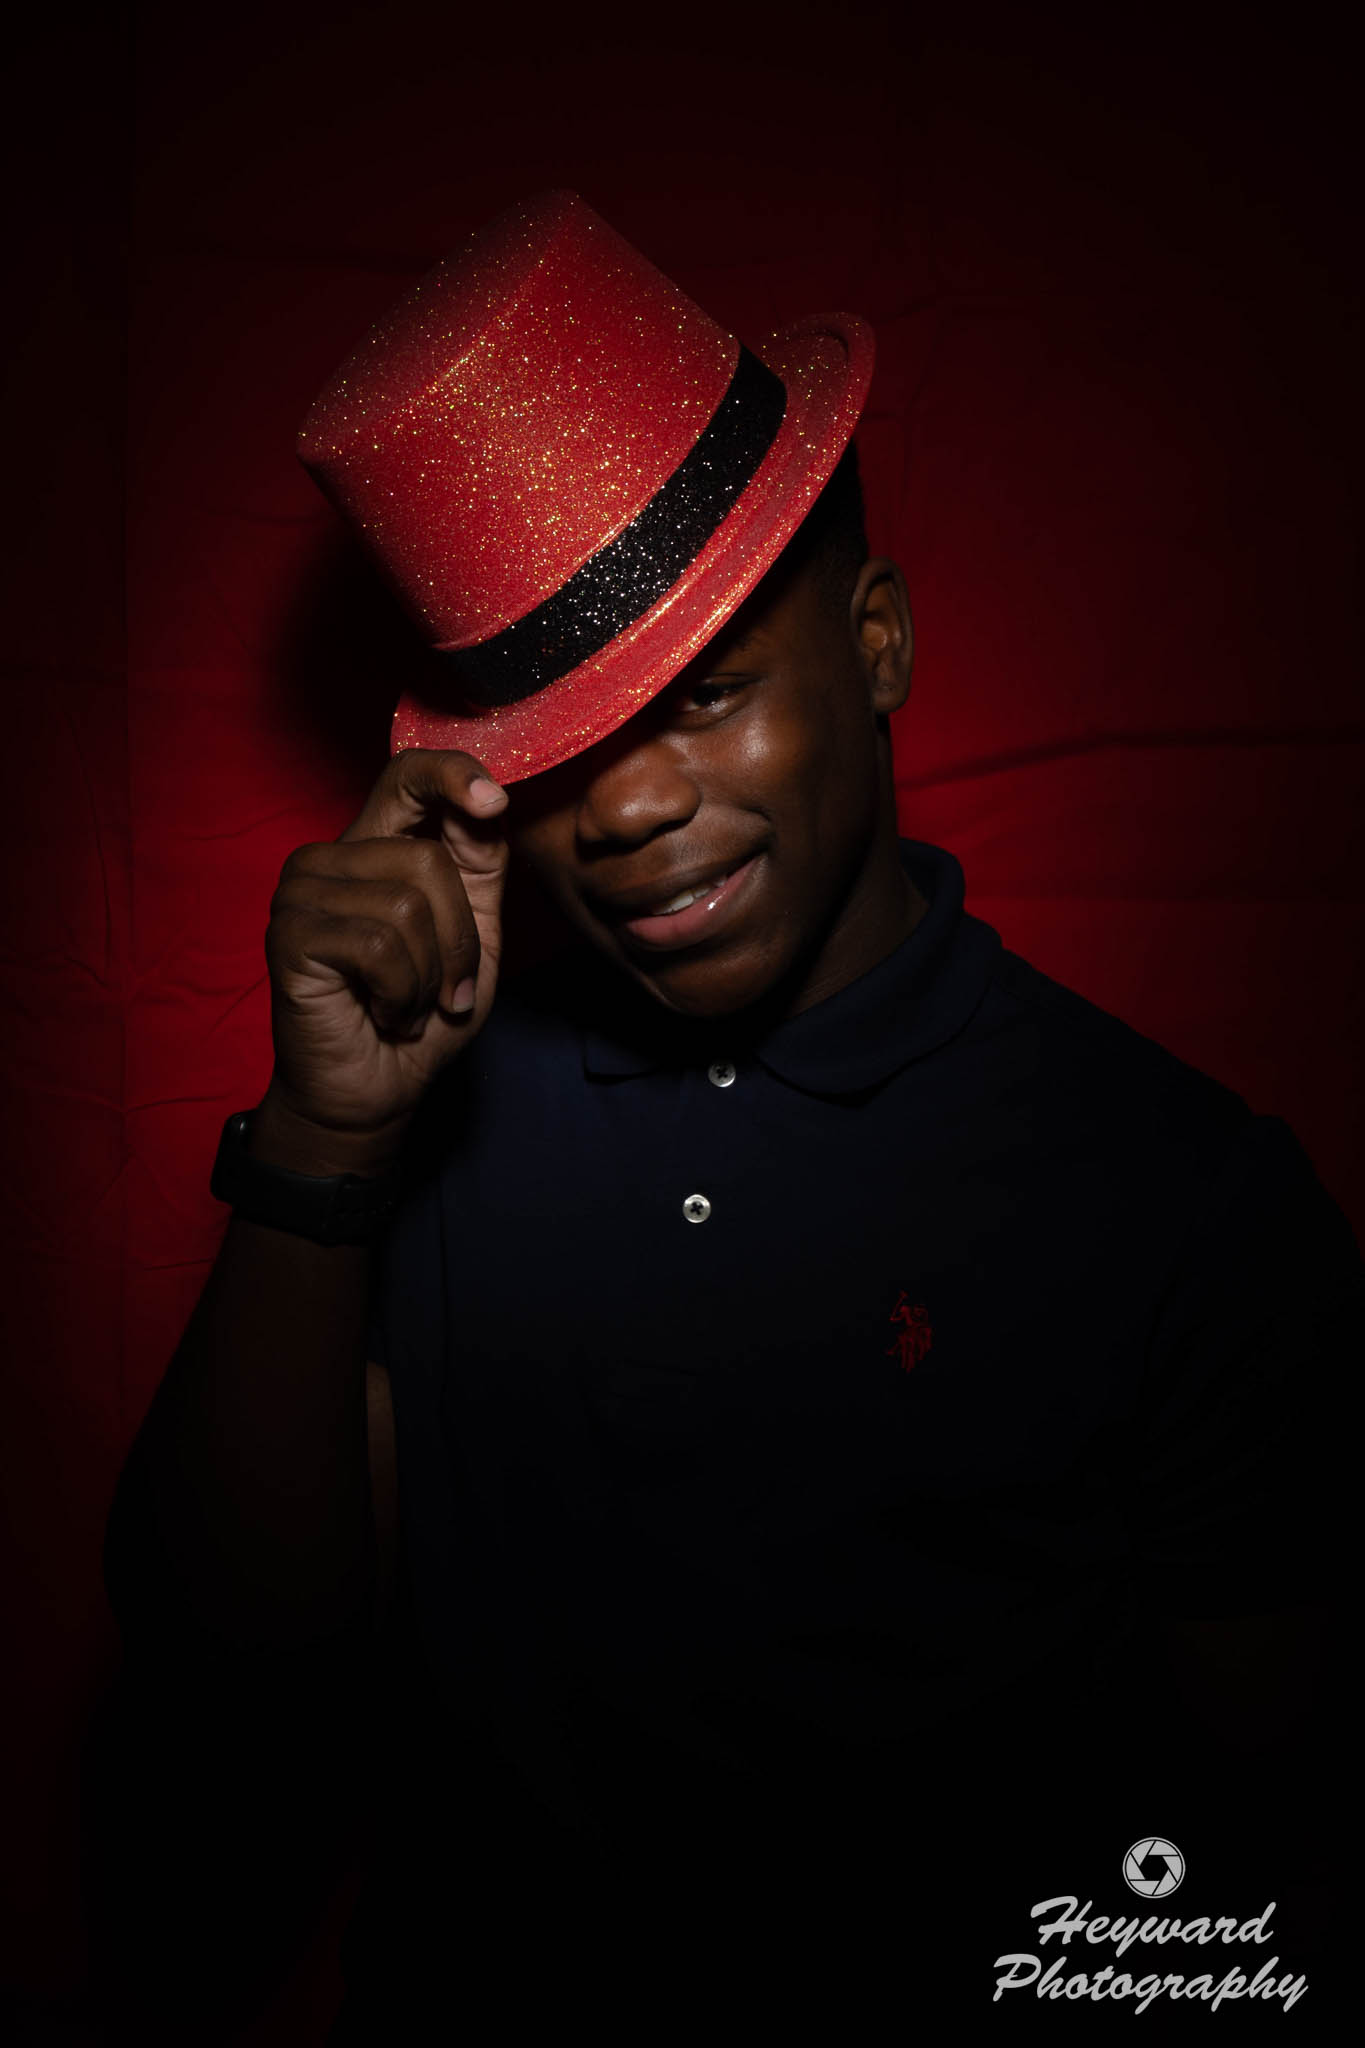 Black Male wearing a red hat.